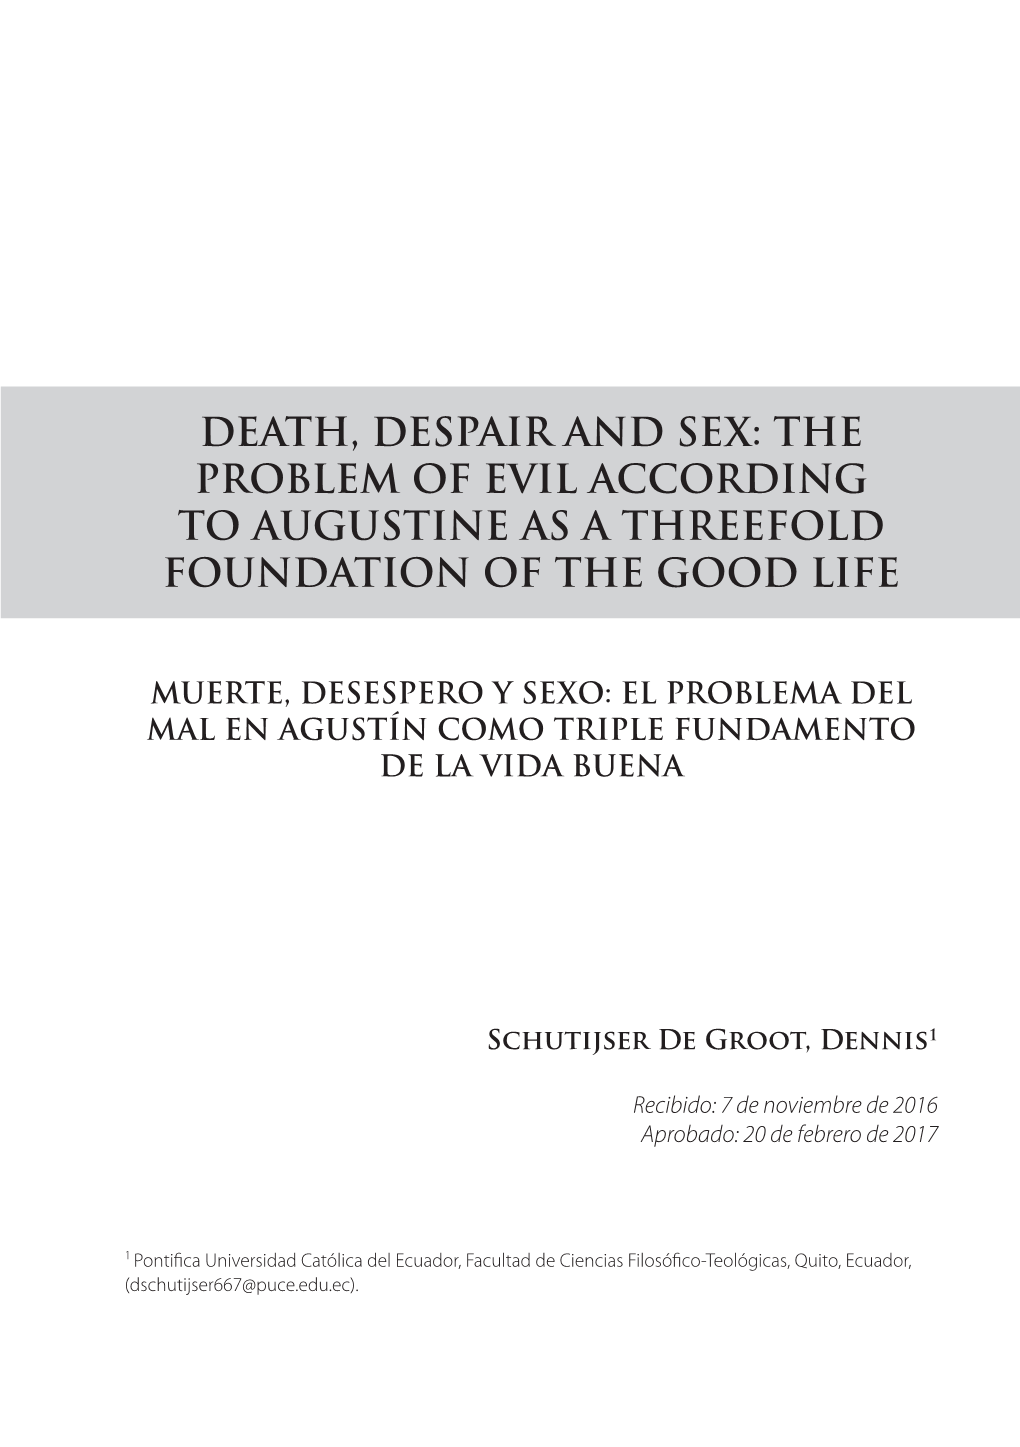 Death, Despair and Sex: the Problem of Evil According to Augustine As a Threefold Foundation of the Good Life